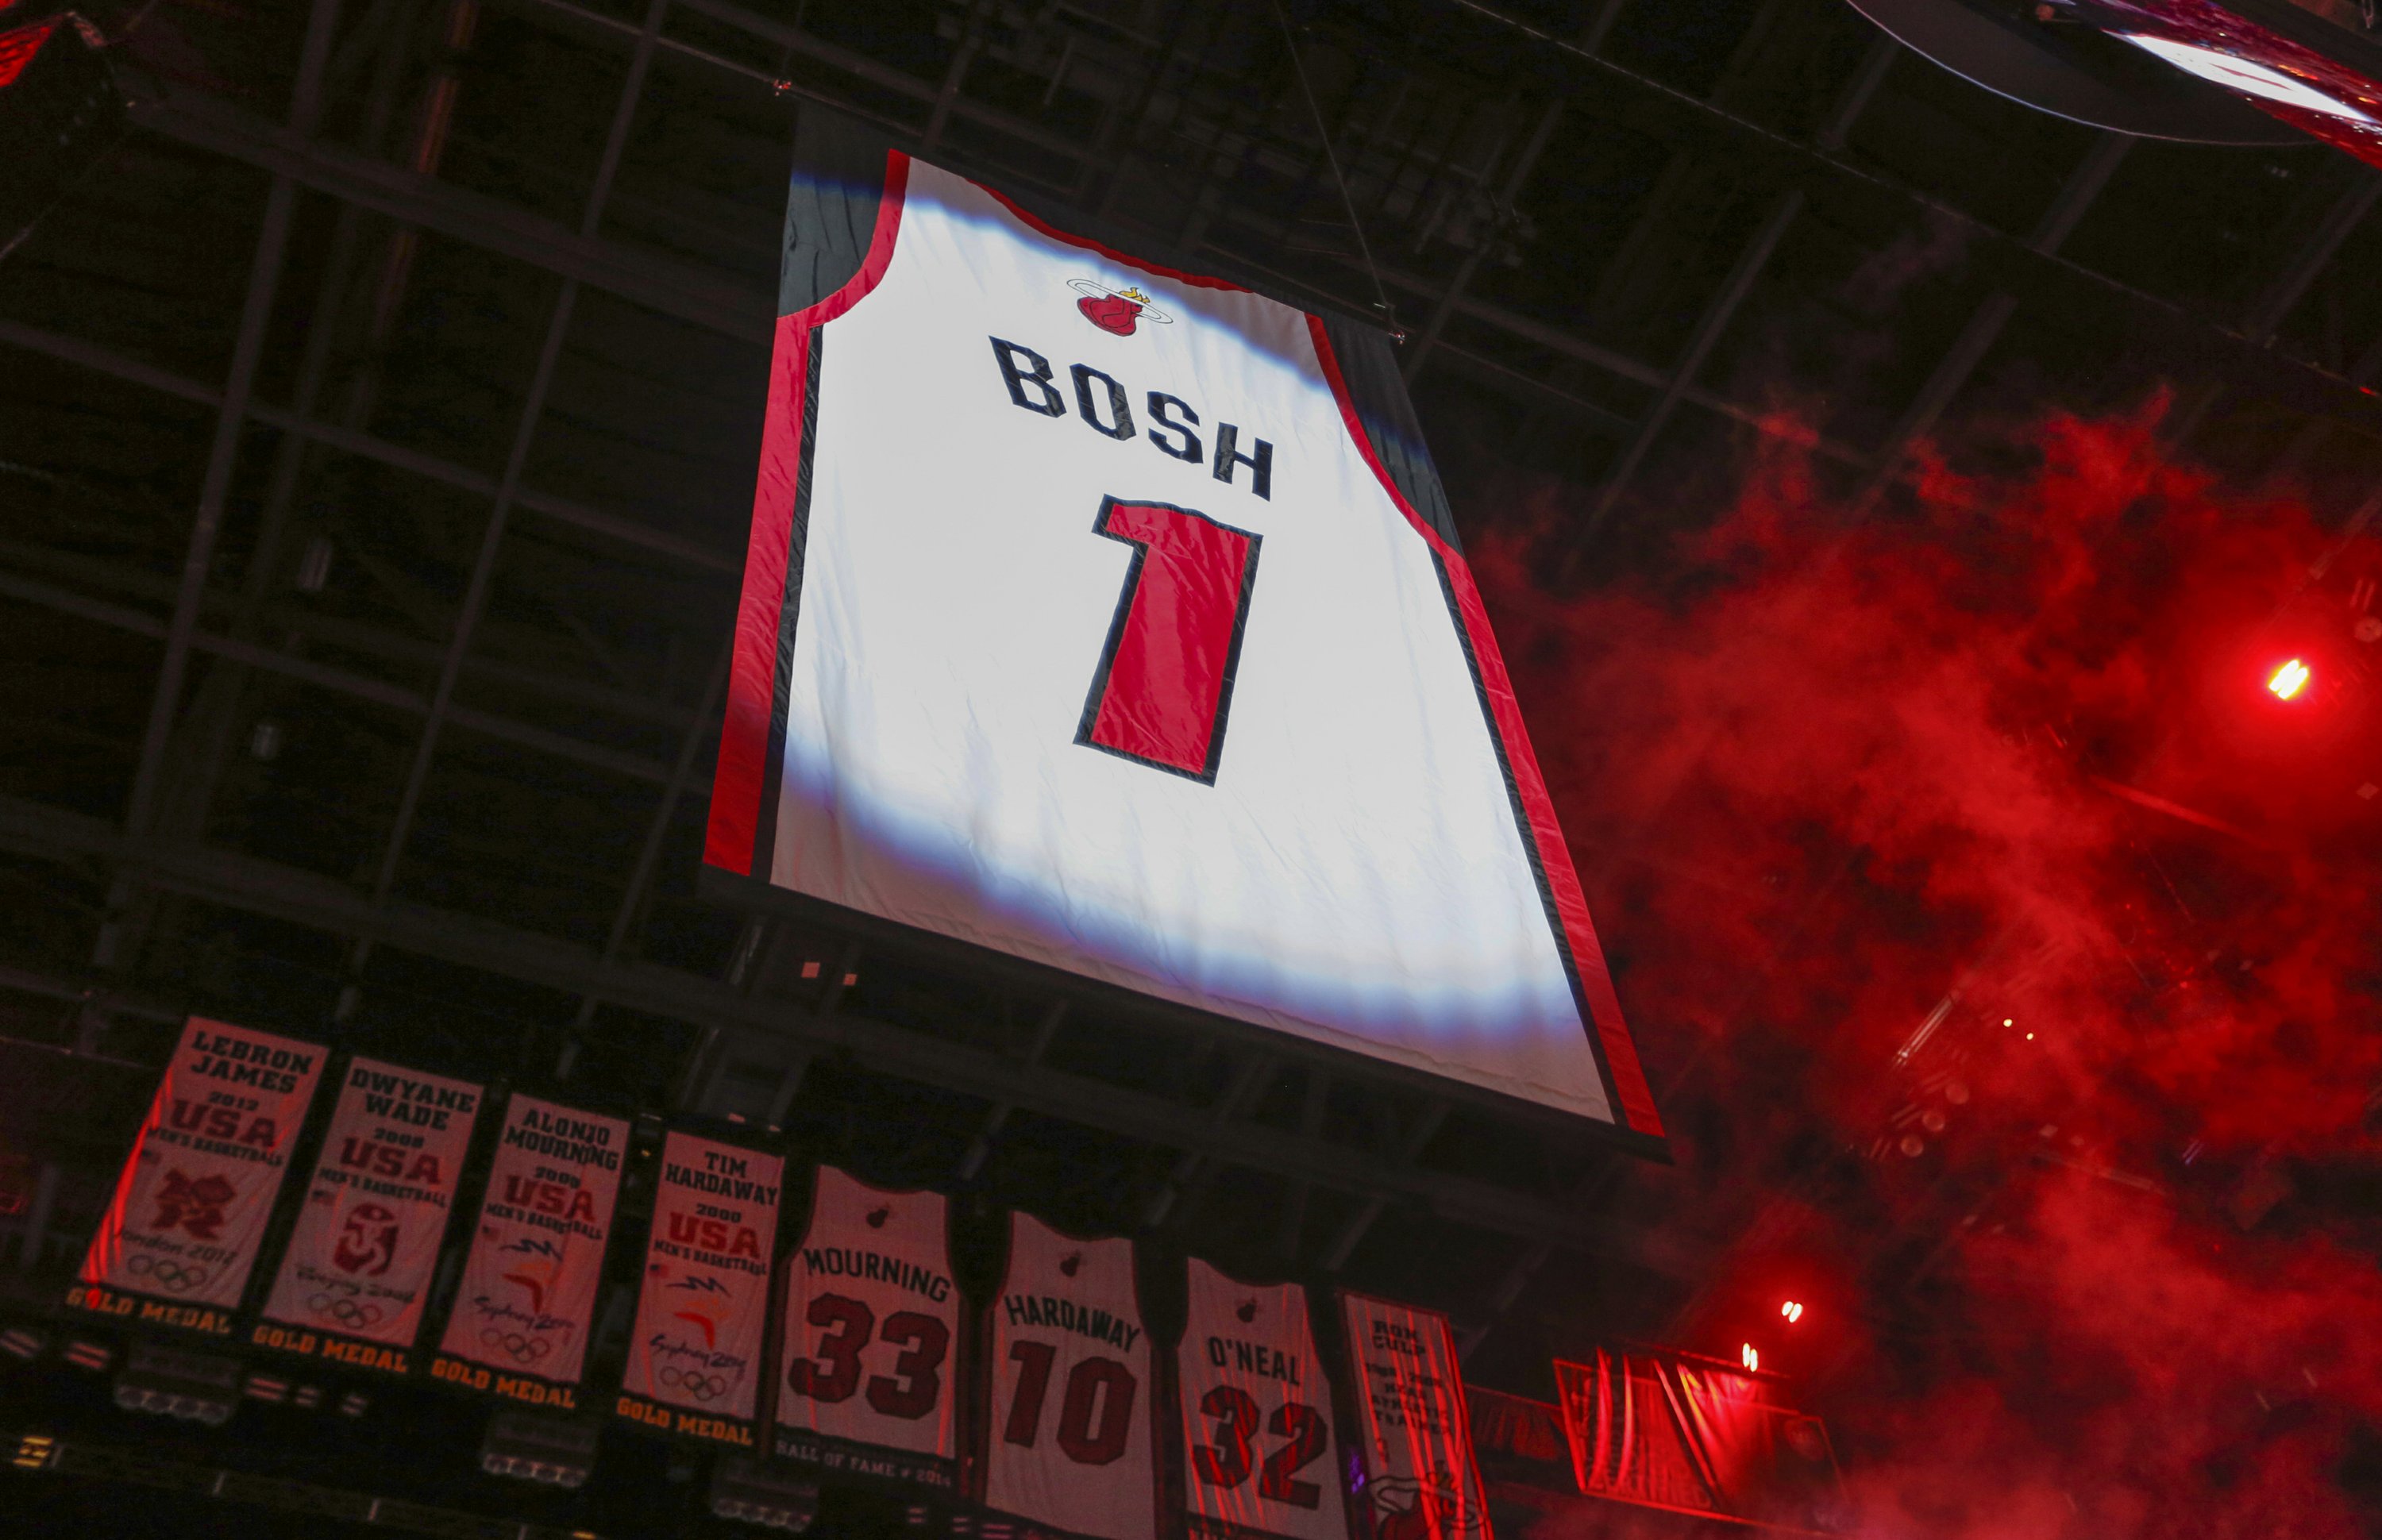 jersey in rafters